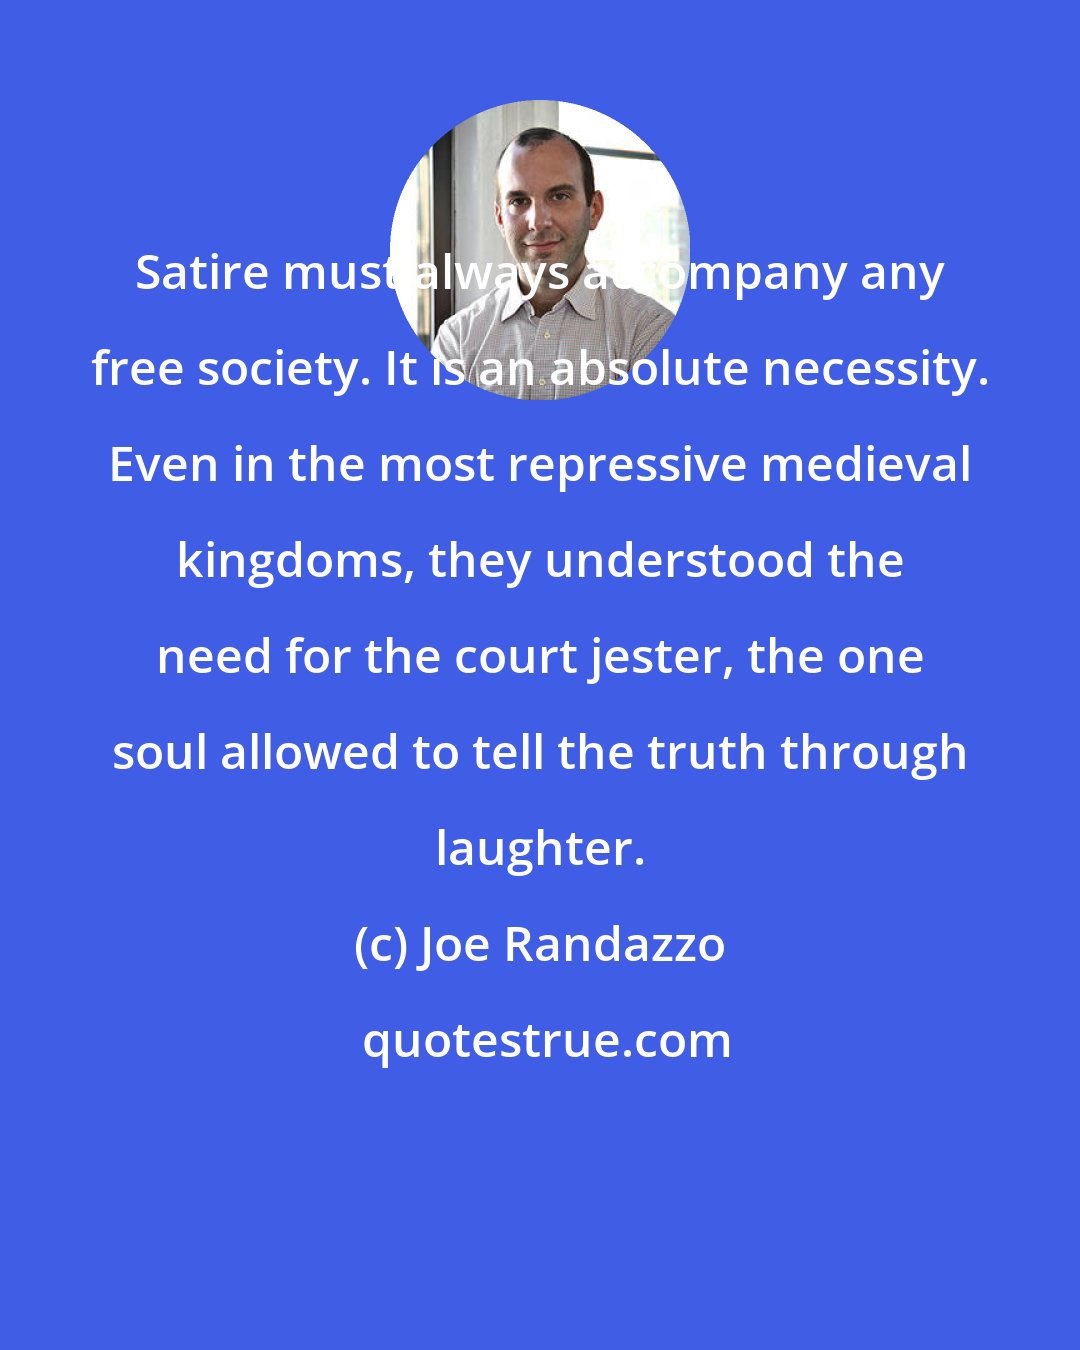 Joe Randazzo: Satire must always accompany any free society. It is an absolute necessity. Even in the most repressive medieval kingdoms, they understood the need for the court jester, the one soul allowed to tell the truth through laughter.